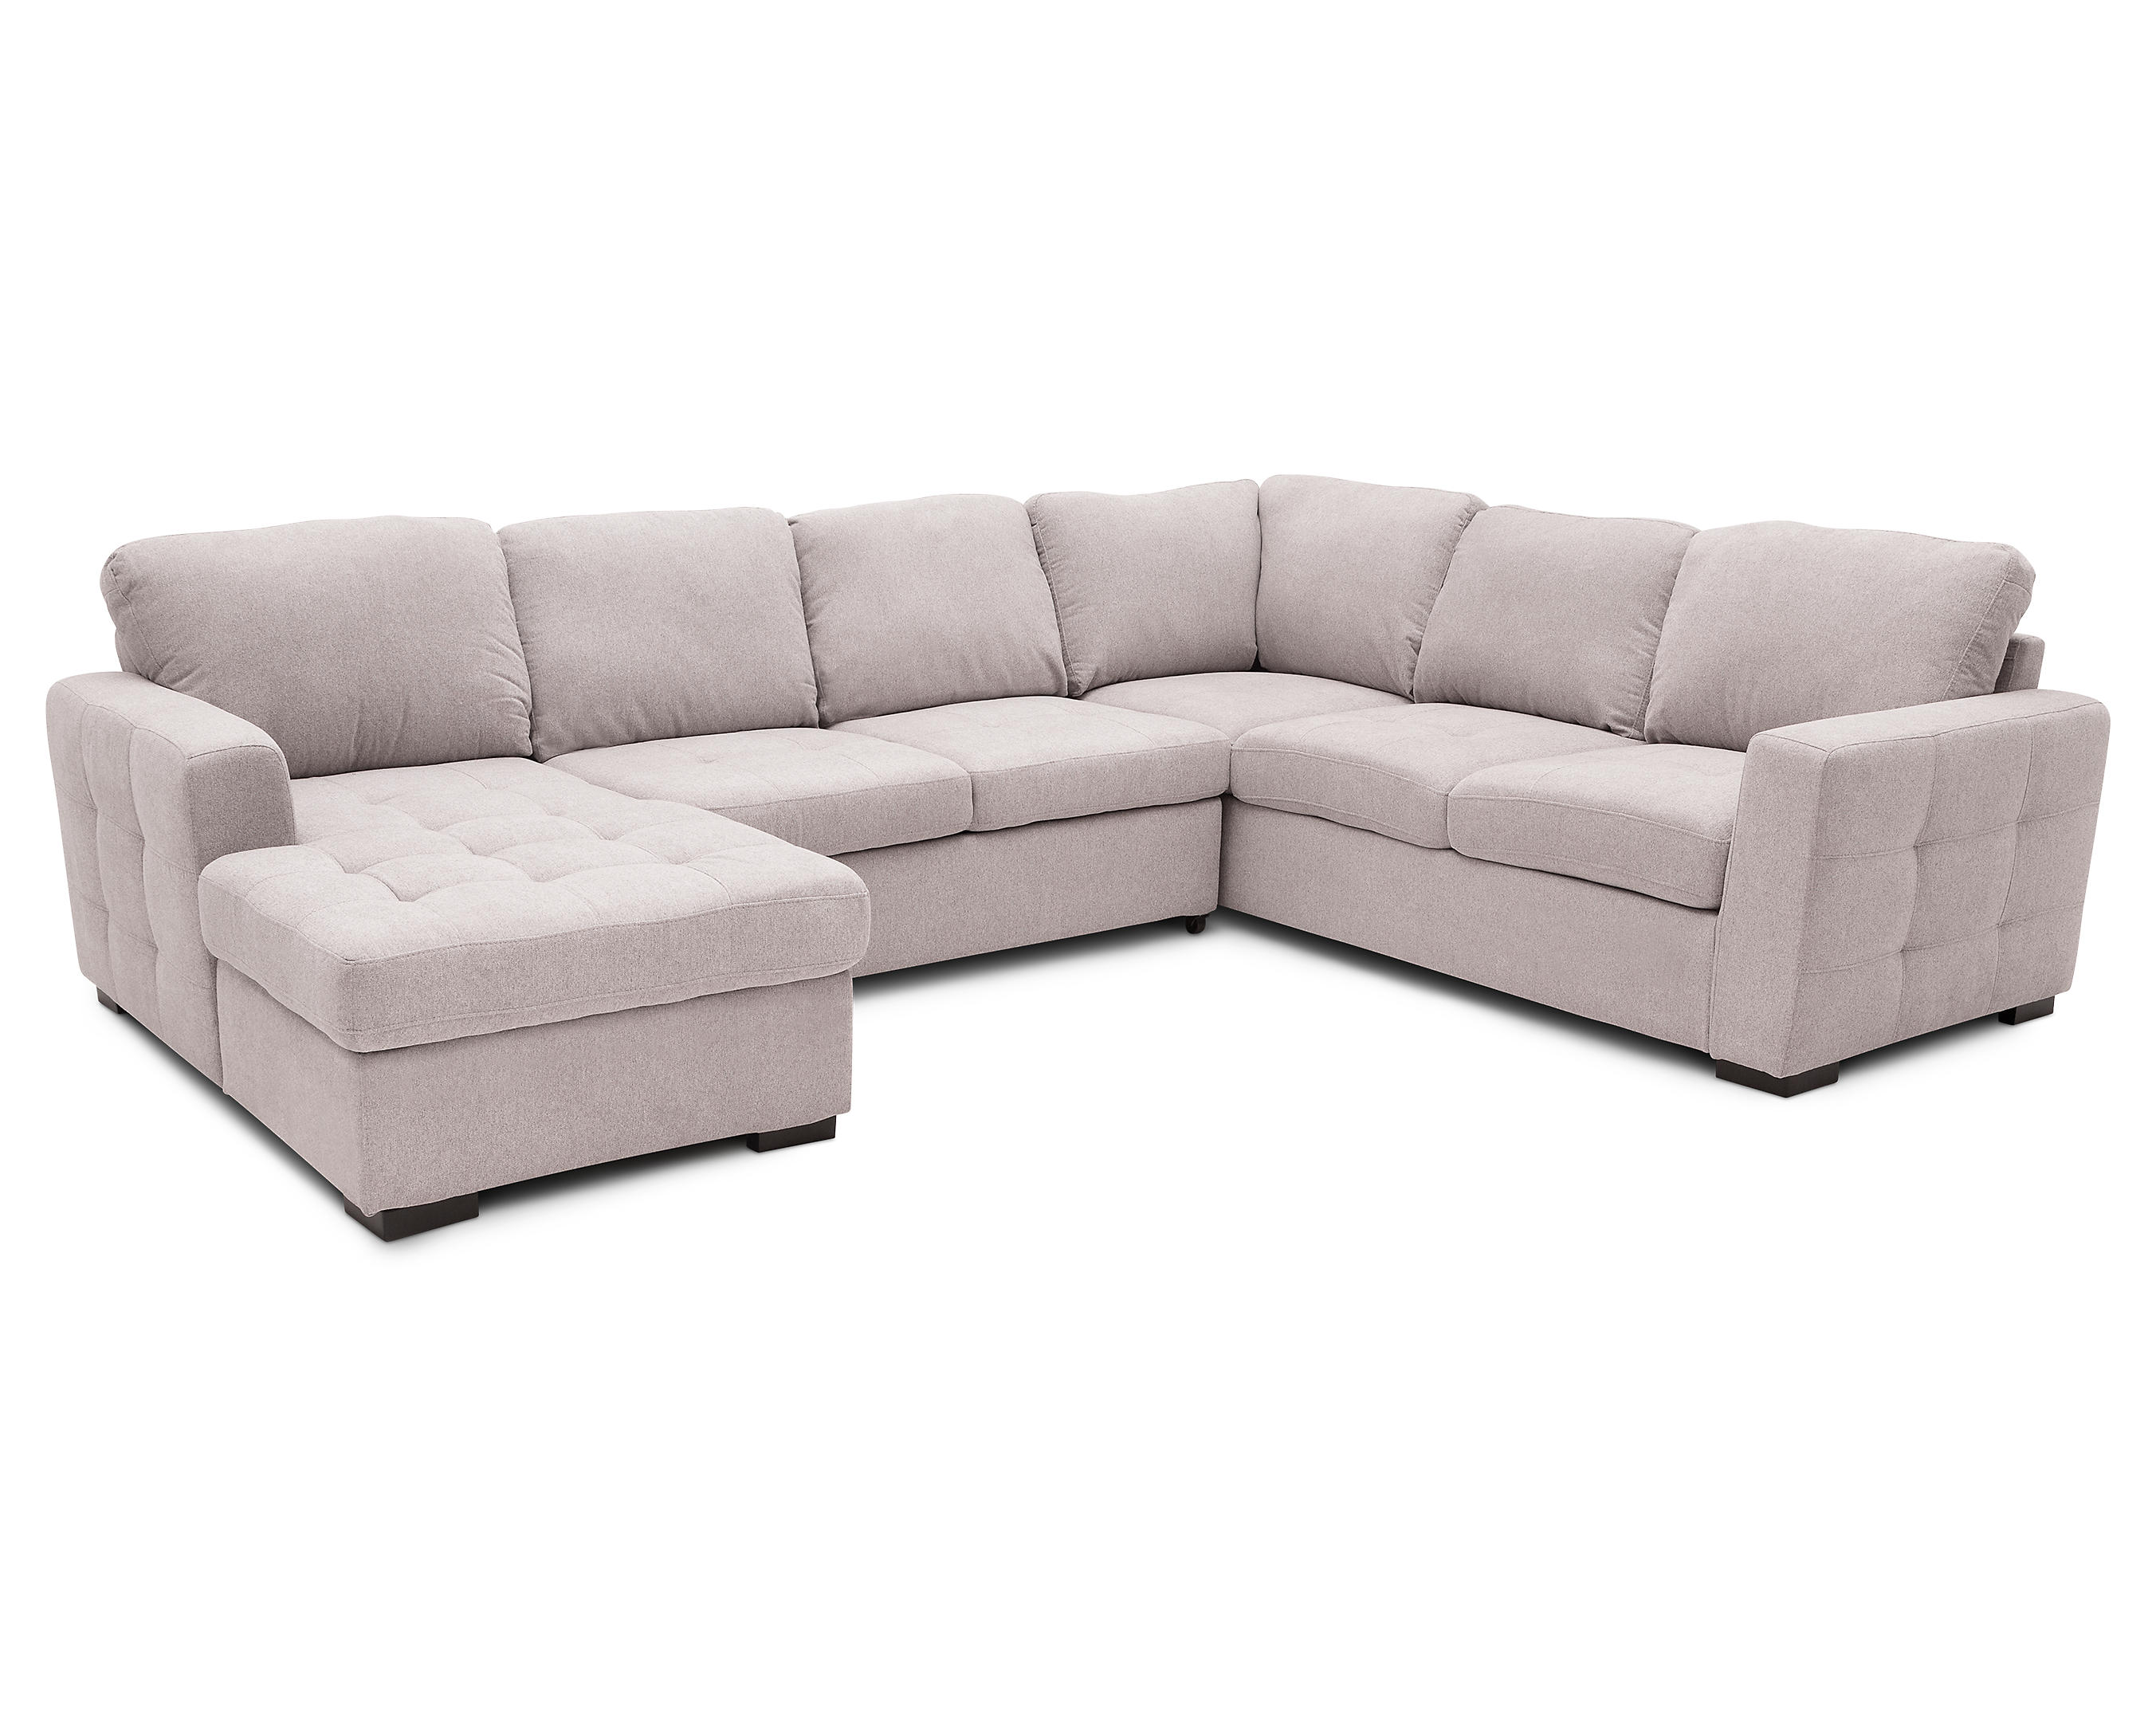 Caruso 3 Pc Fabric Sleeper Sectional